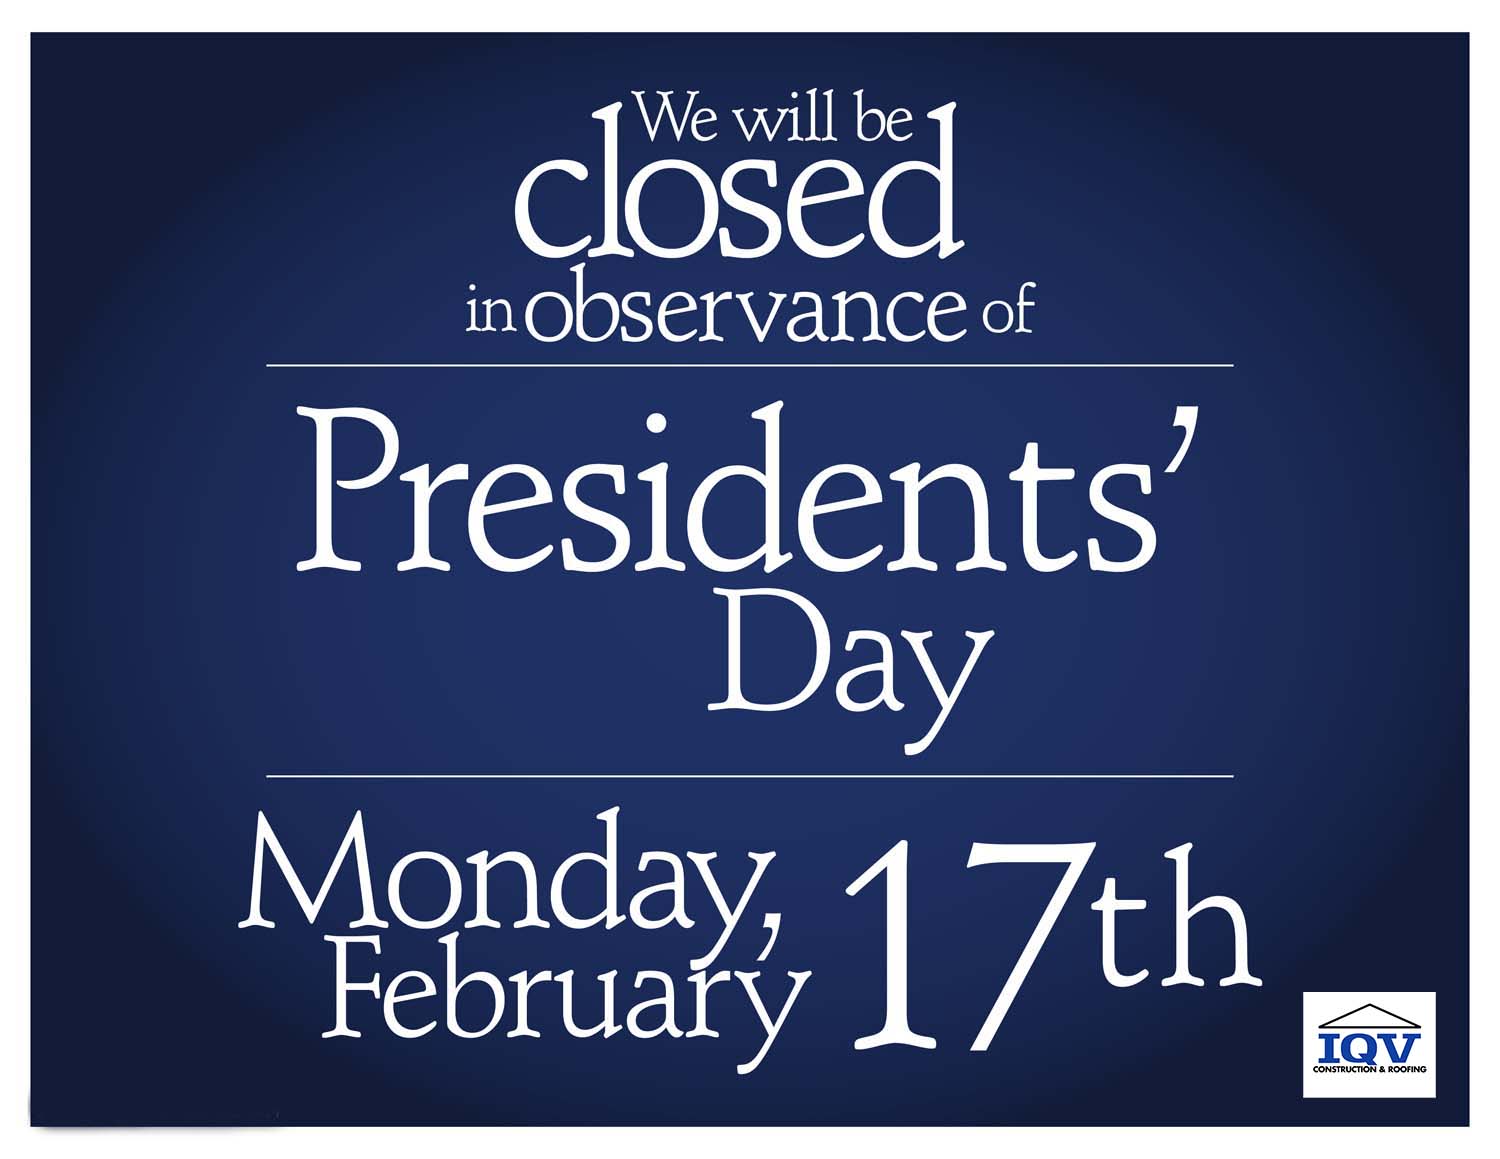 We're Closed for President's Day - IQV Construction & Roofing